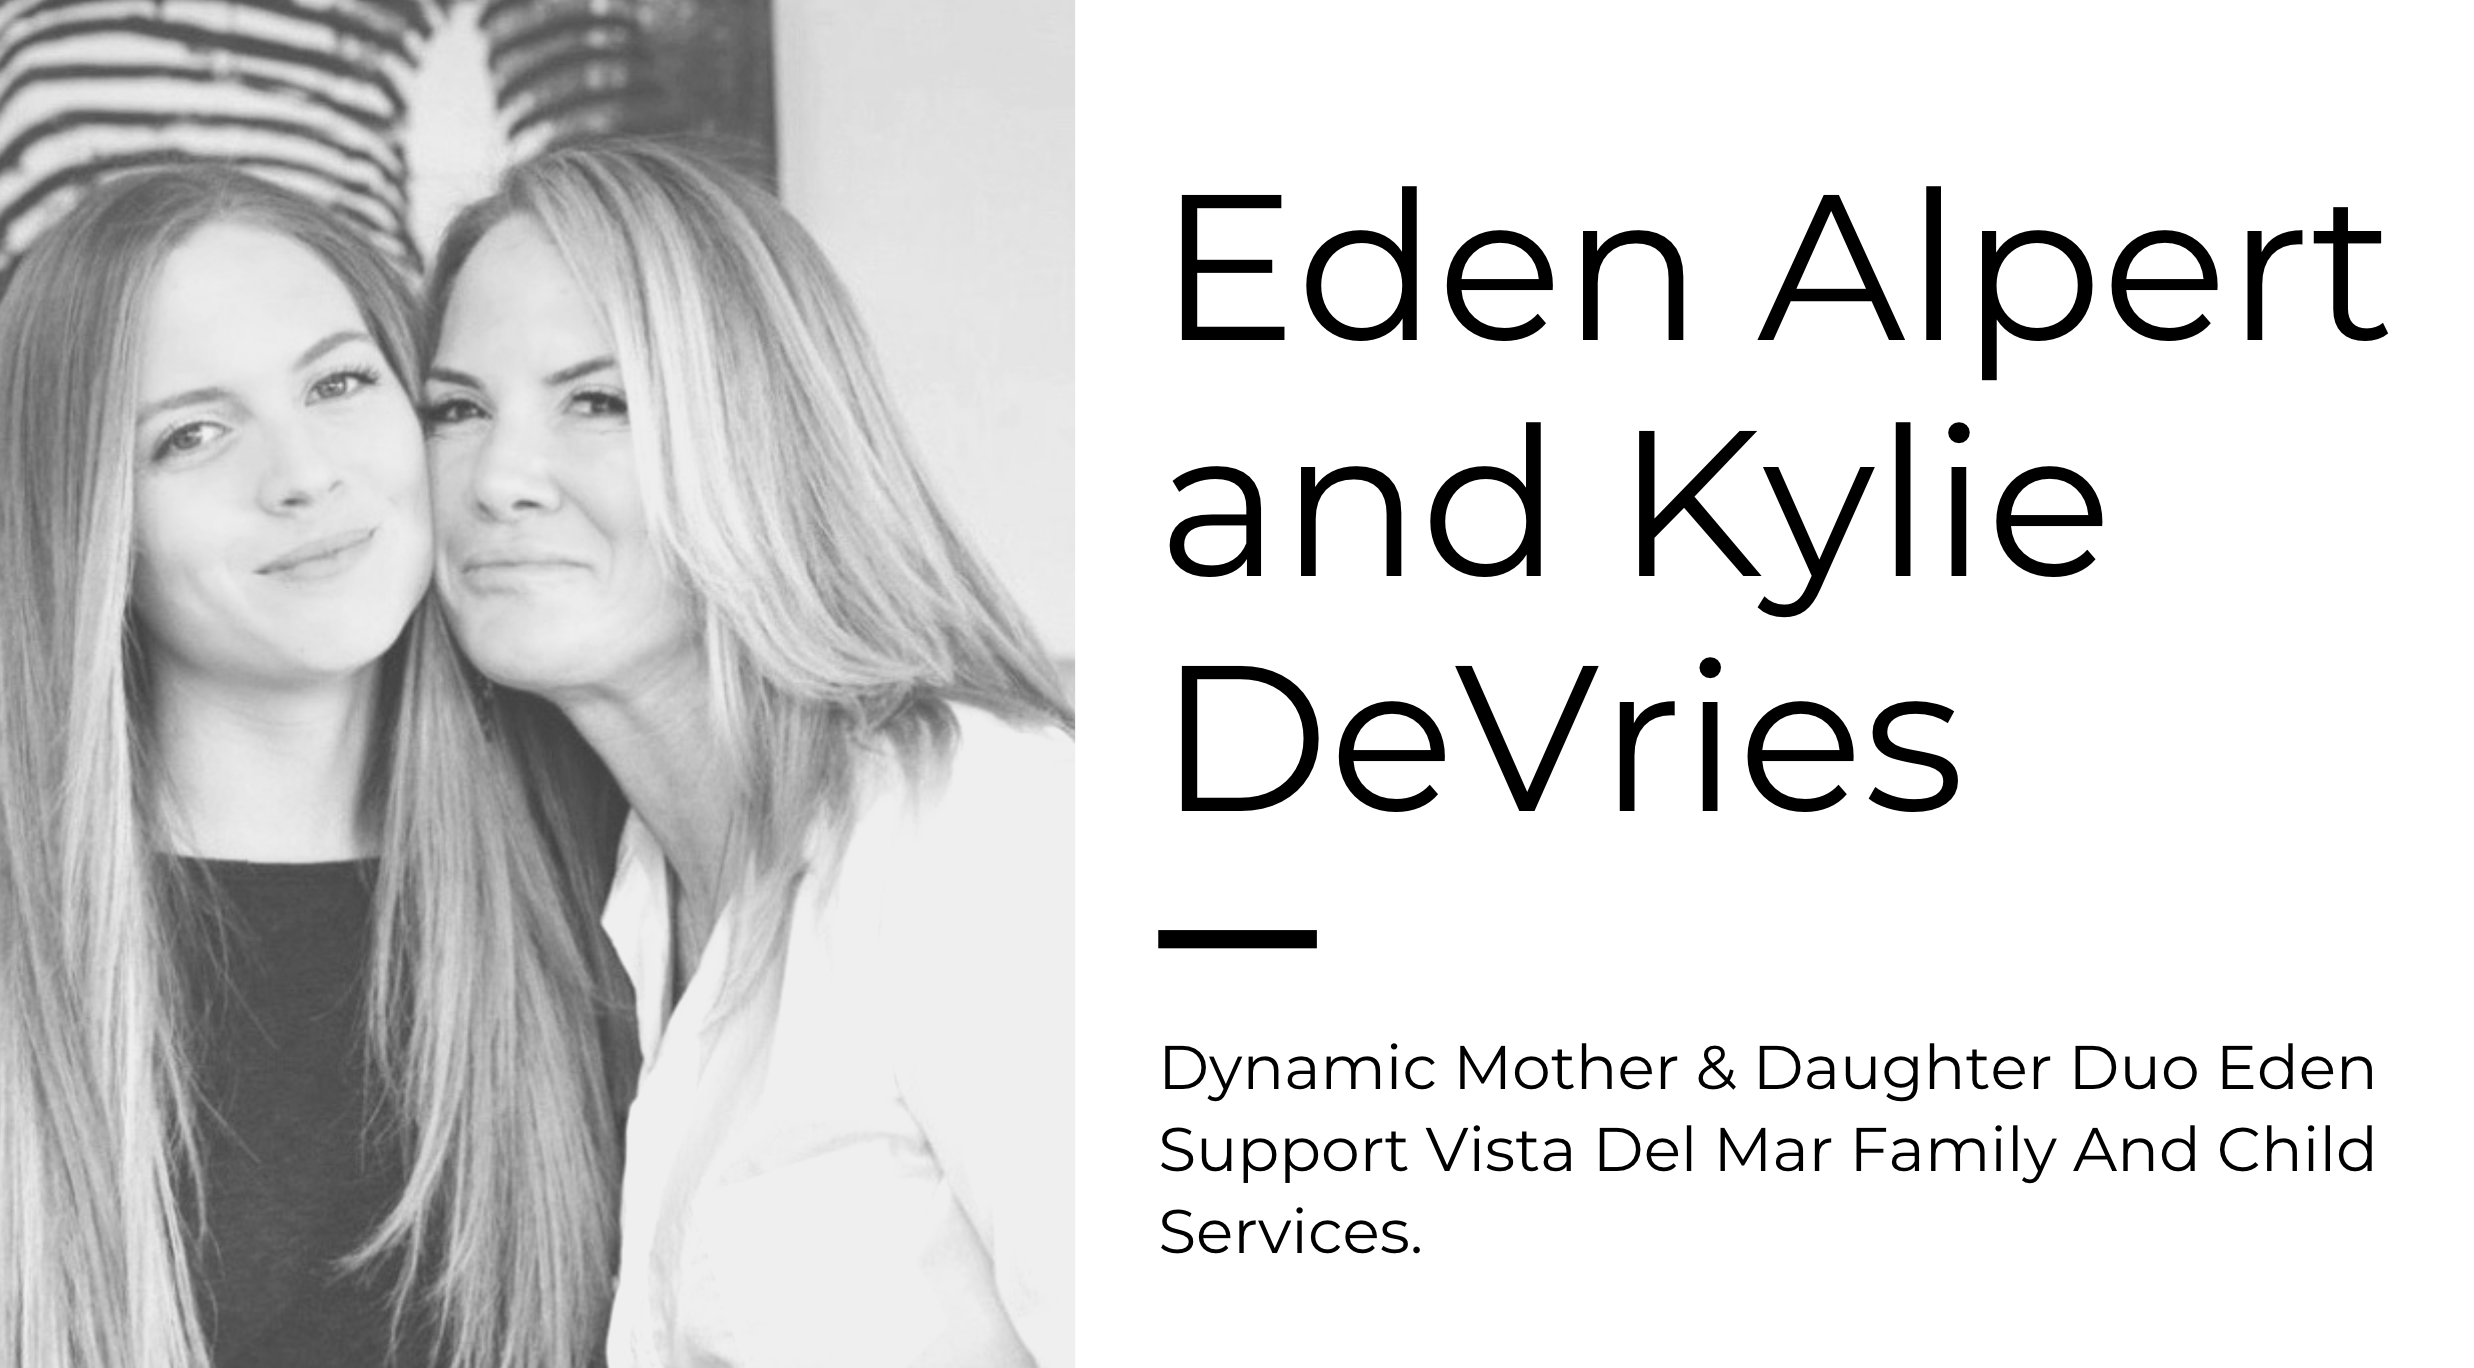 Eden Alpert and Kylie DeVries- Dynamic Mother & Daughter Duo Eden Support Vista Del Mar Family And Child Services. - Lamo Footwear